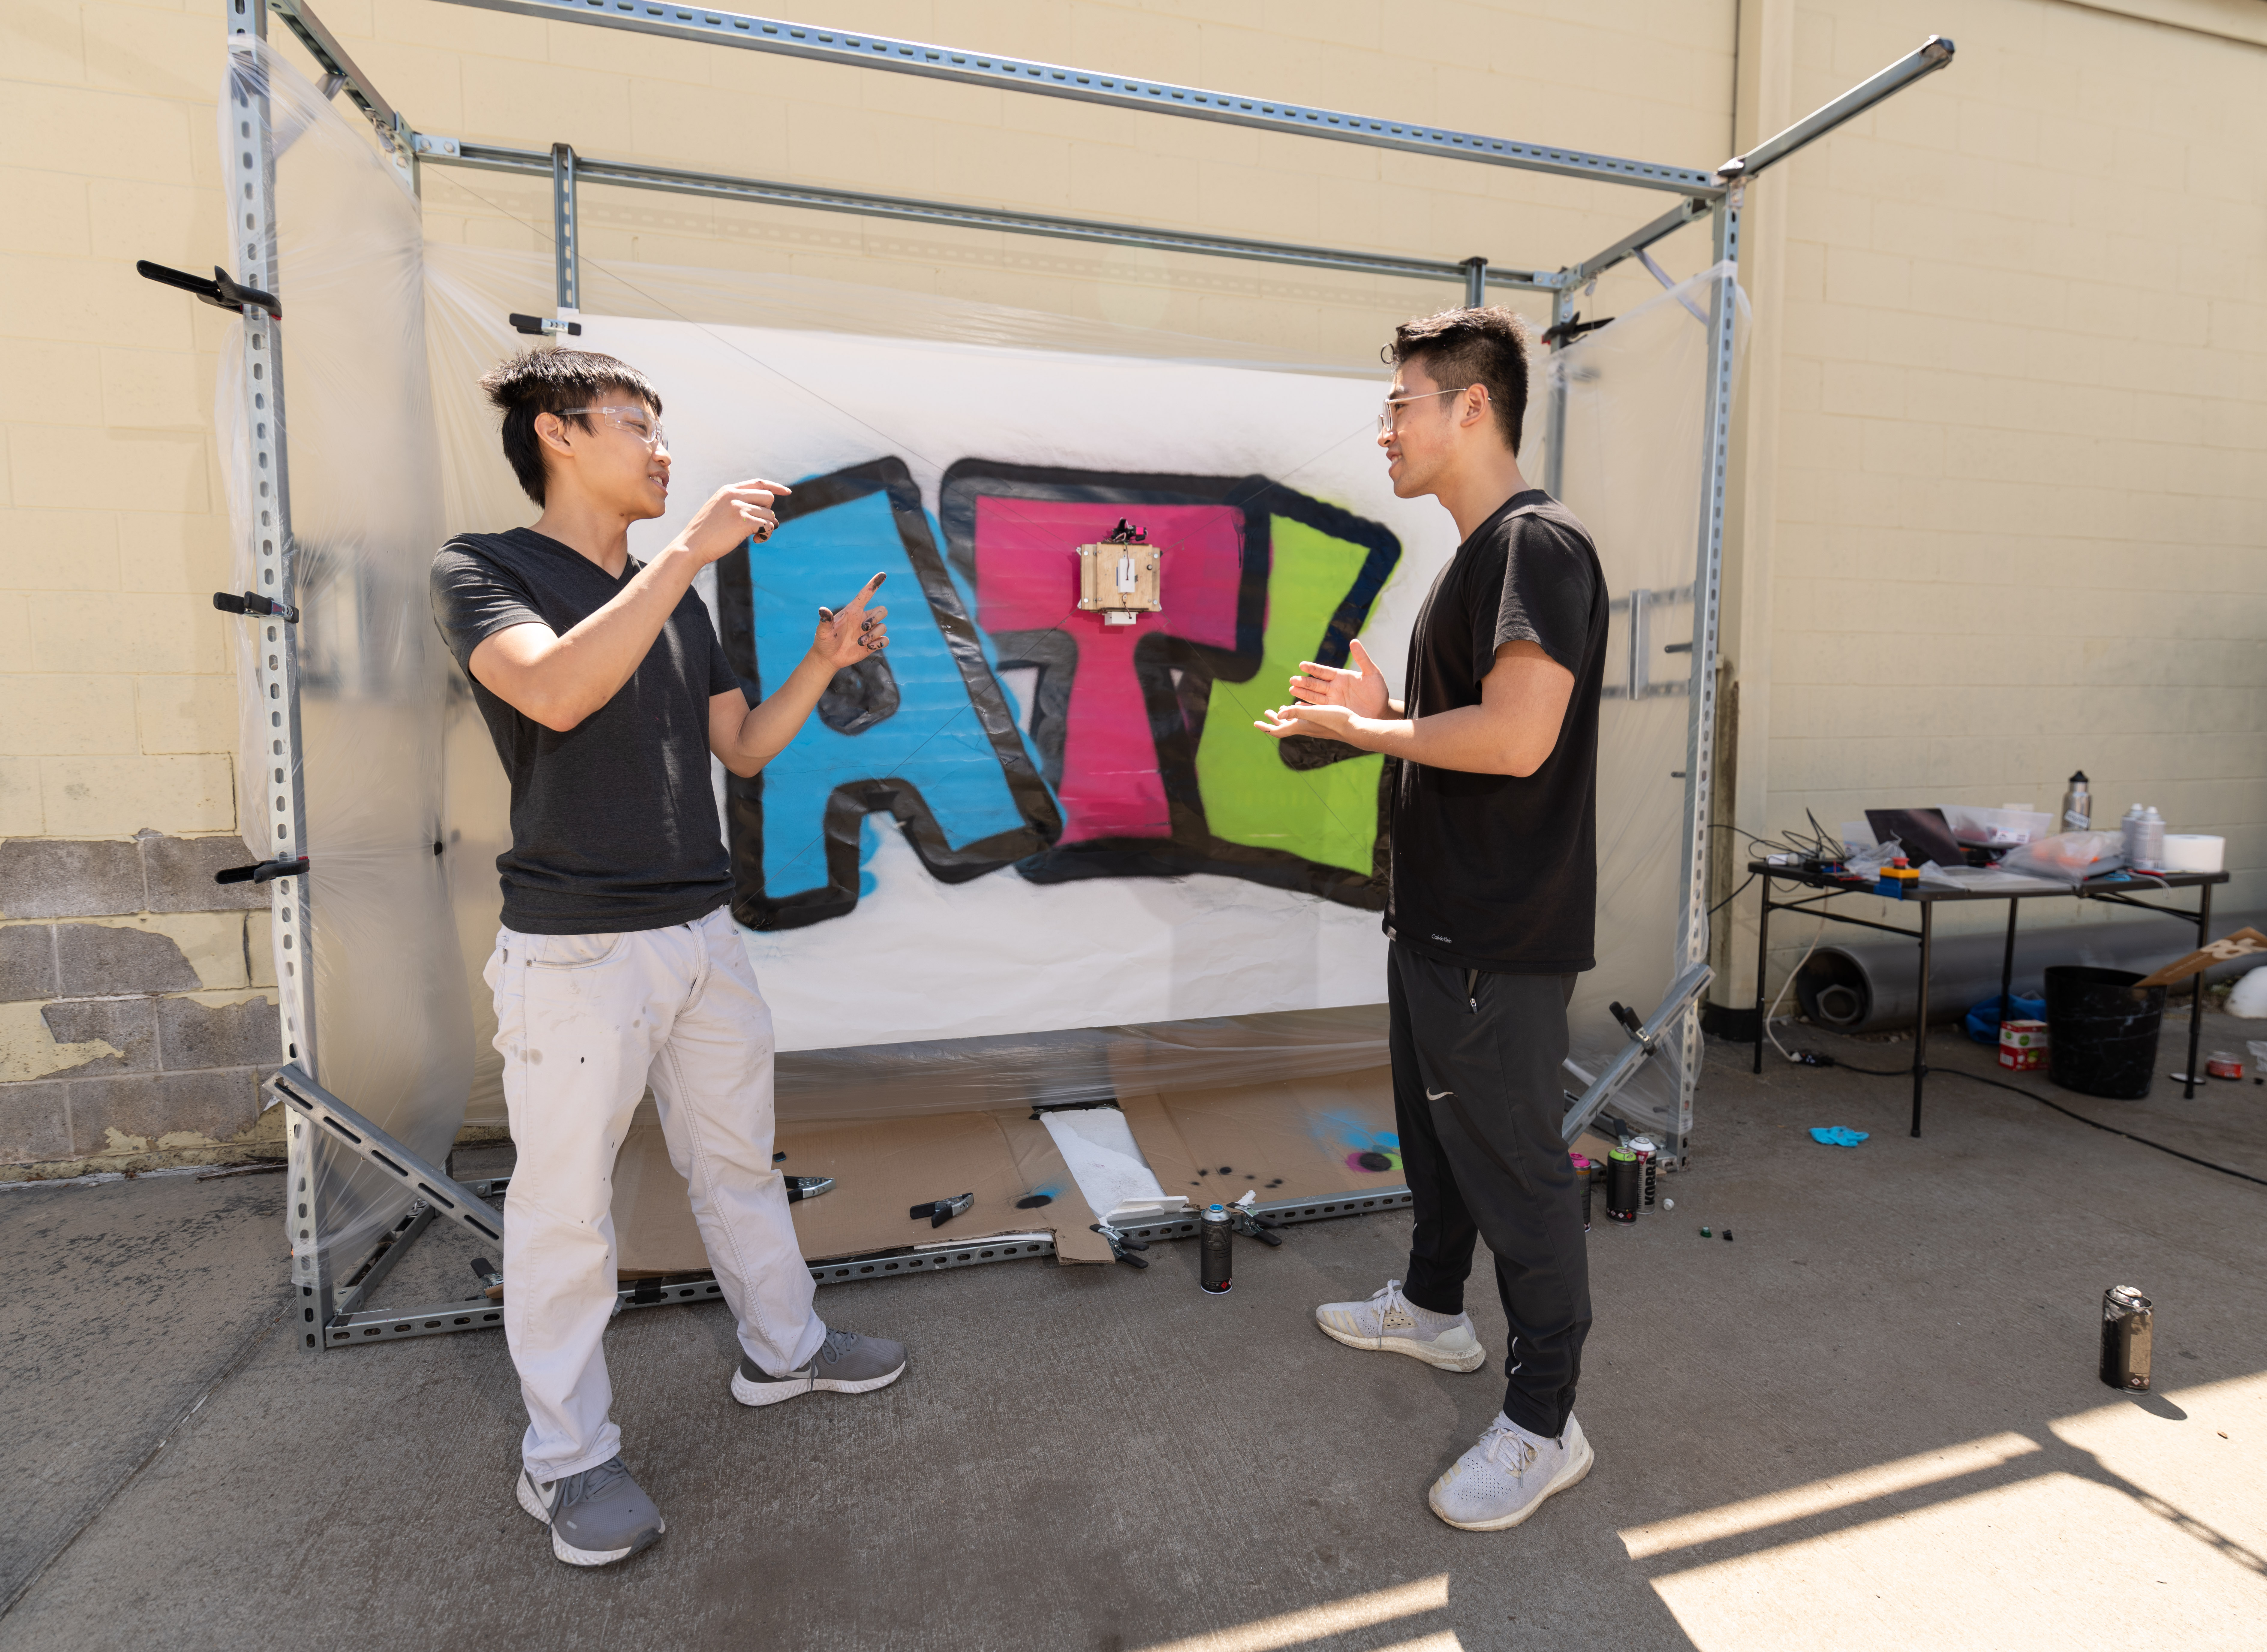 Two young men on either side of a canvas where the GTGraffiti robot has painted ATL in blue, pink, and green block letters.